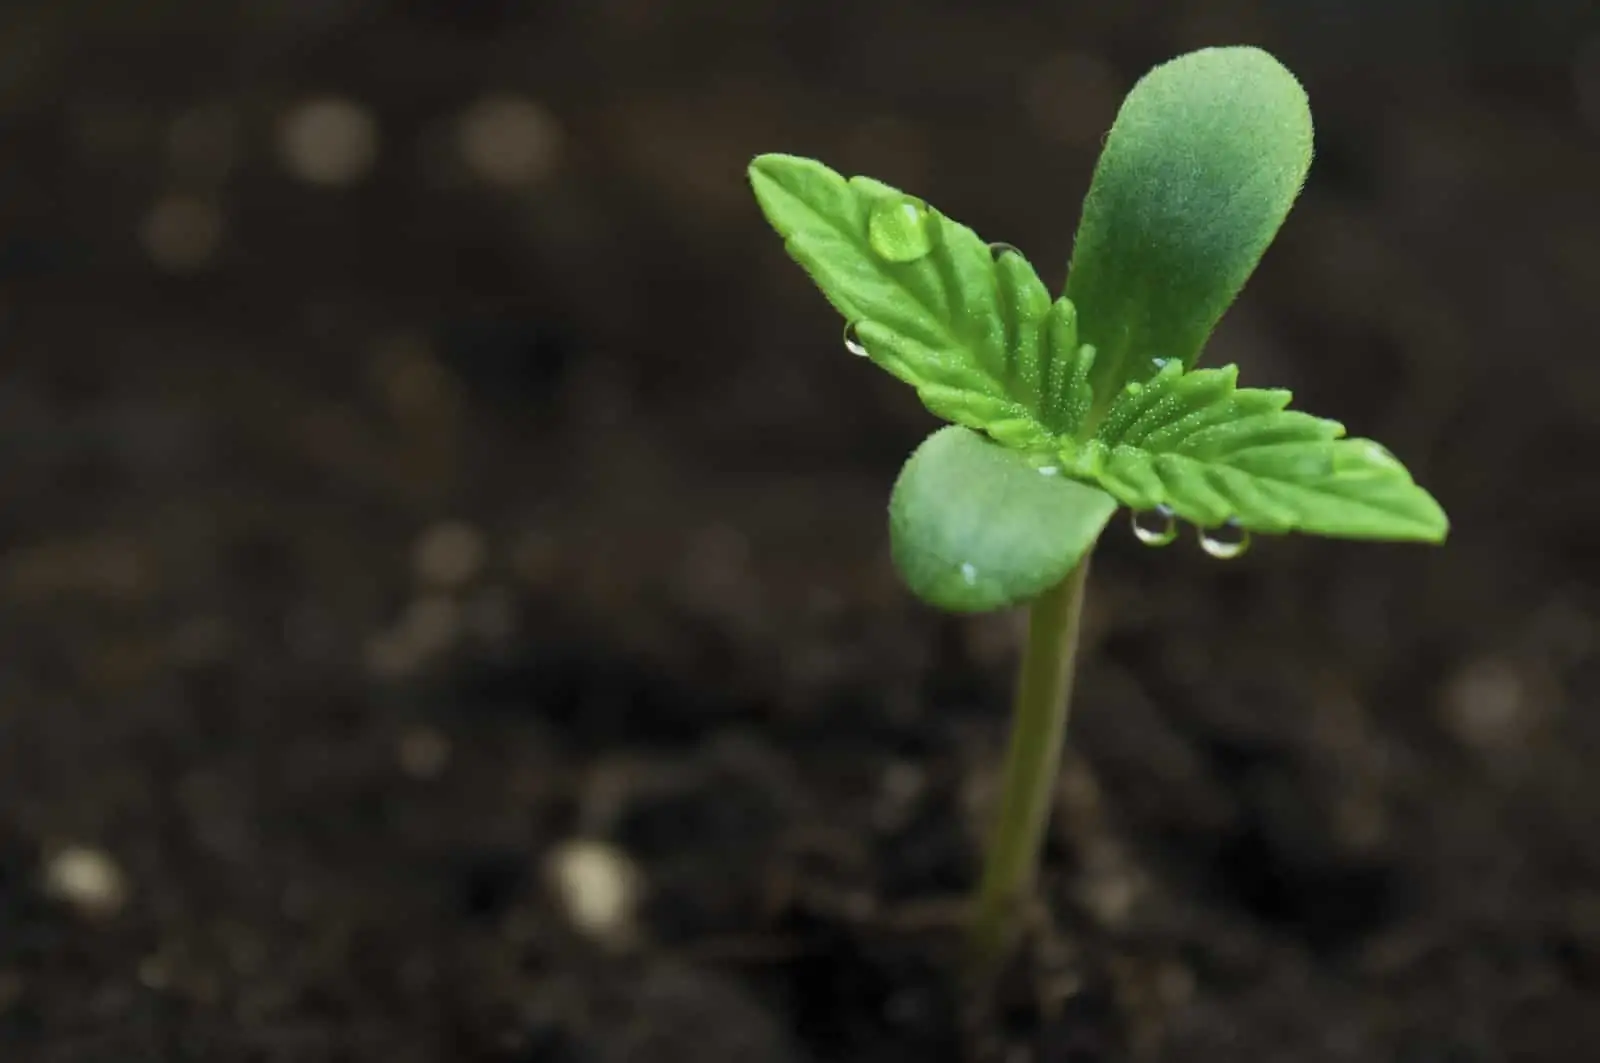 How to Grow Cannabis From a Seed in 10 Easy Steps